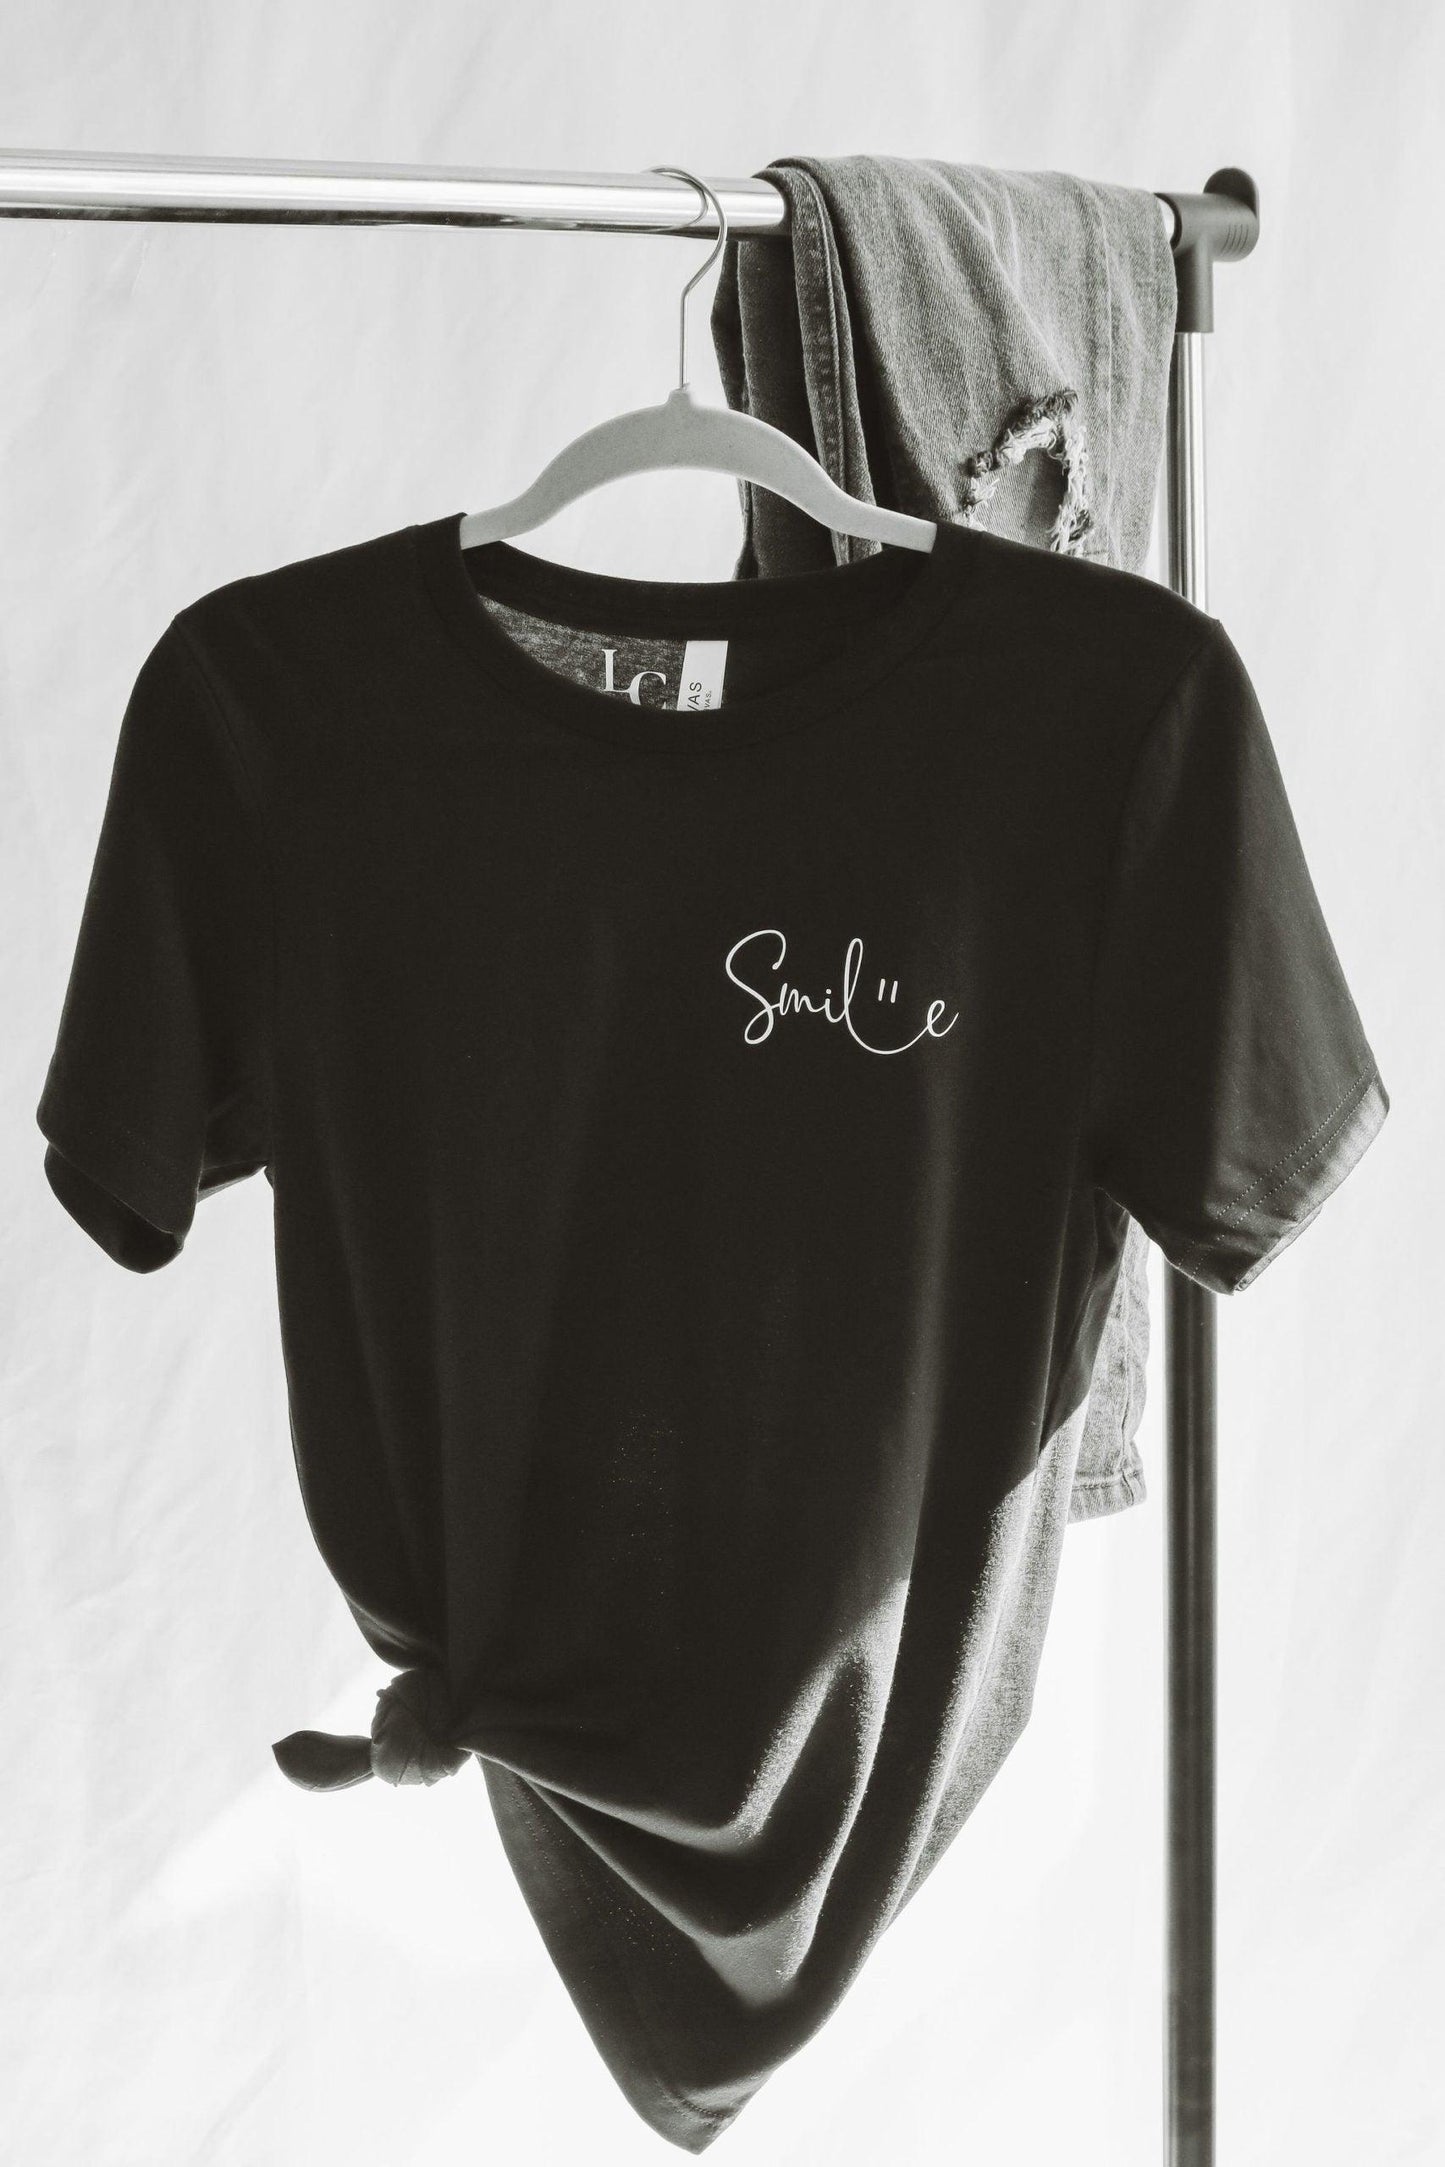 A black and white photo of a short sleeve T-shirt hanging on a clothing rack with a styled pair of hark jeans next to it. Smile is written in a cute cursive font, with a smiley face illustrated between the connection of l and e.